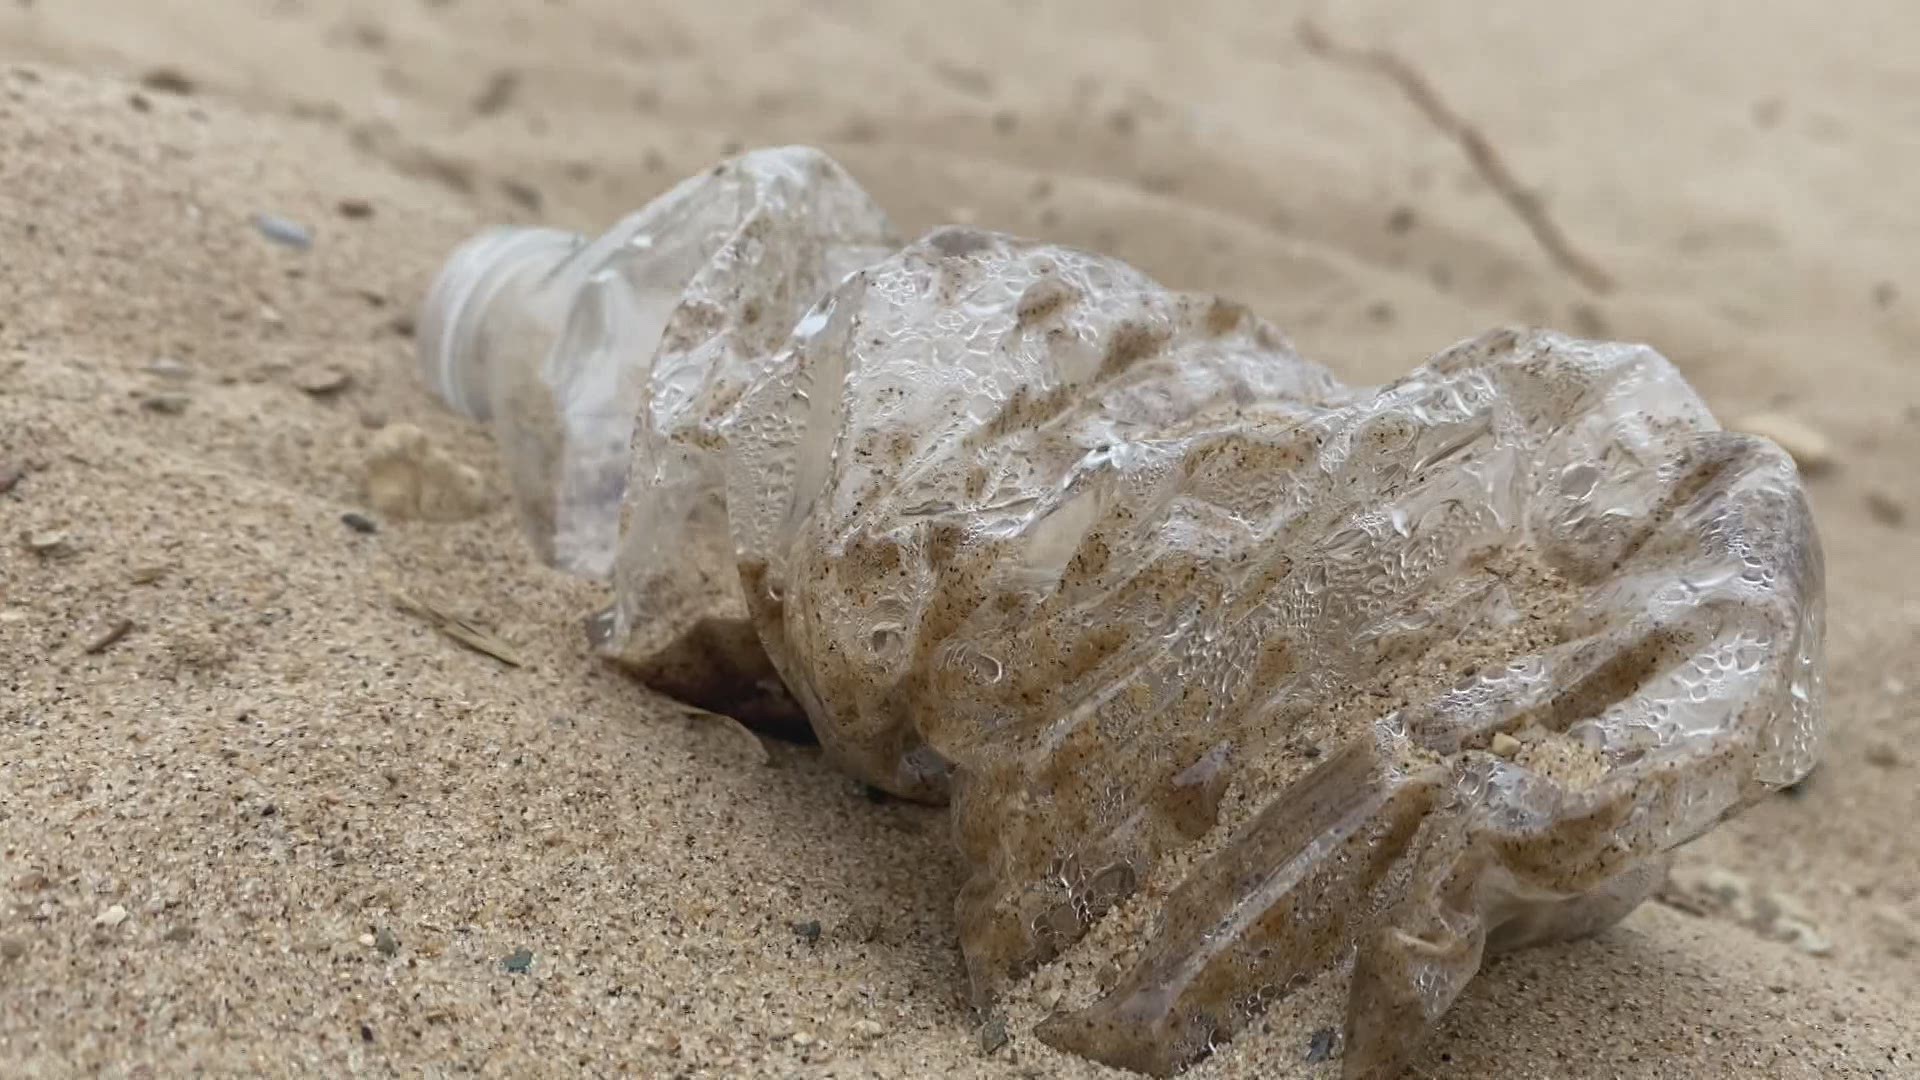 "The fact is that there are 22 million pounds of trash that are pulled out of the Great Lakes every year," said Nature Conservation Educator Jessica Gregory.